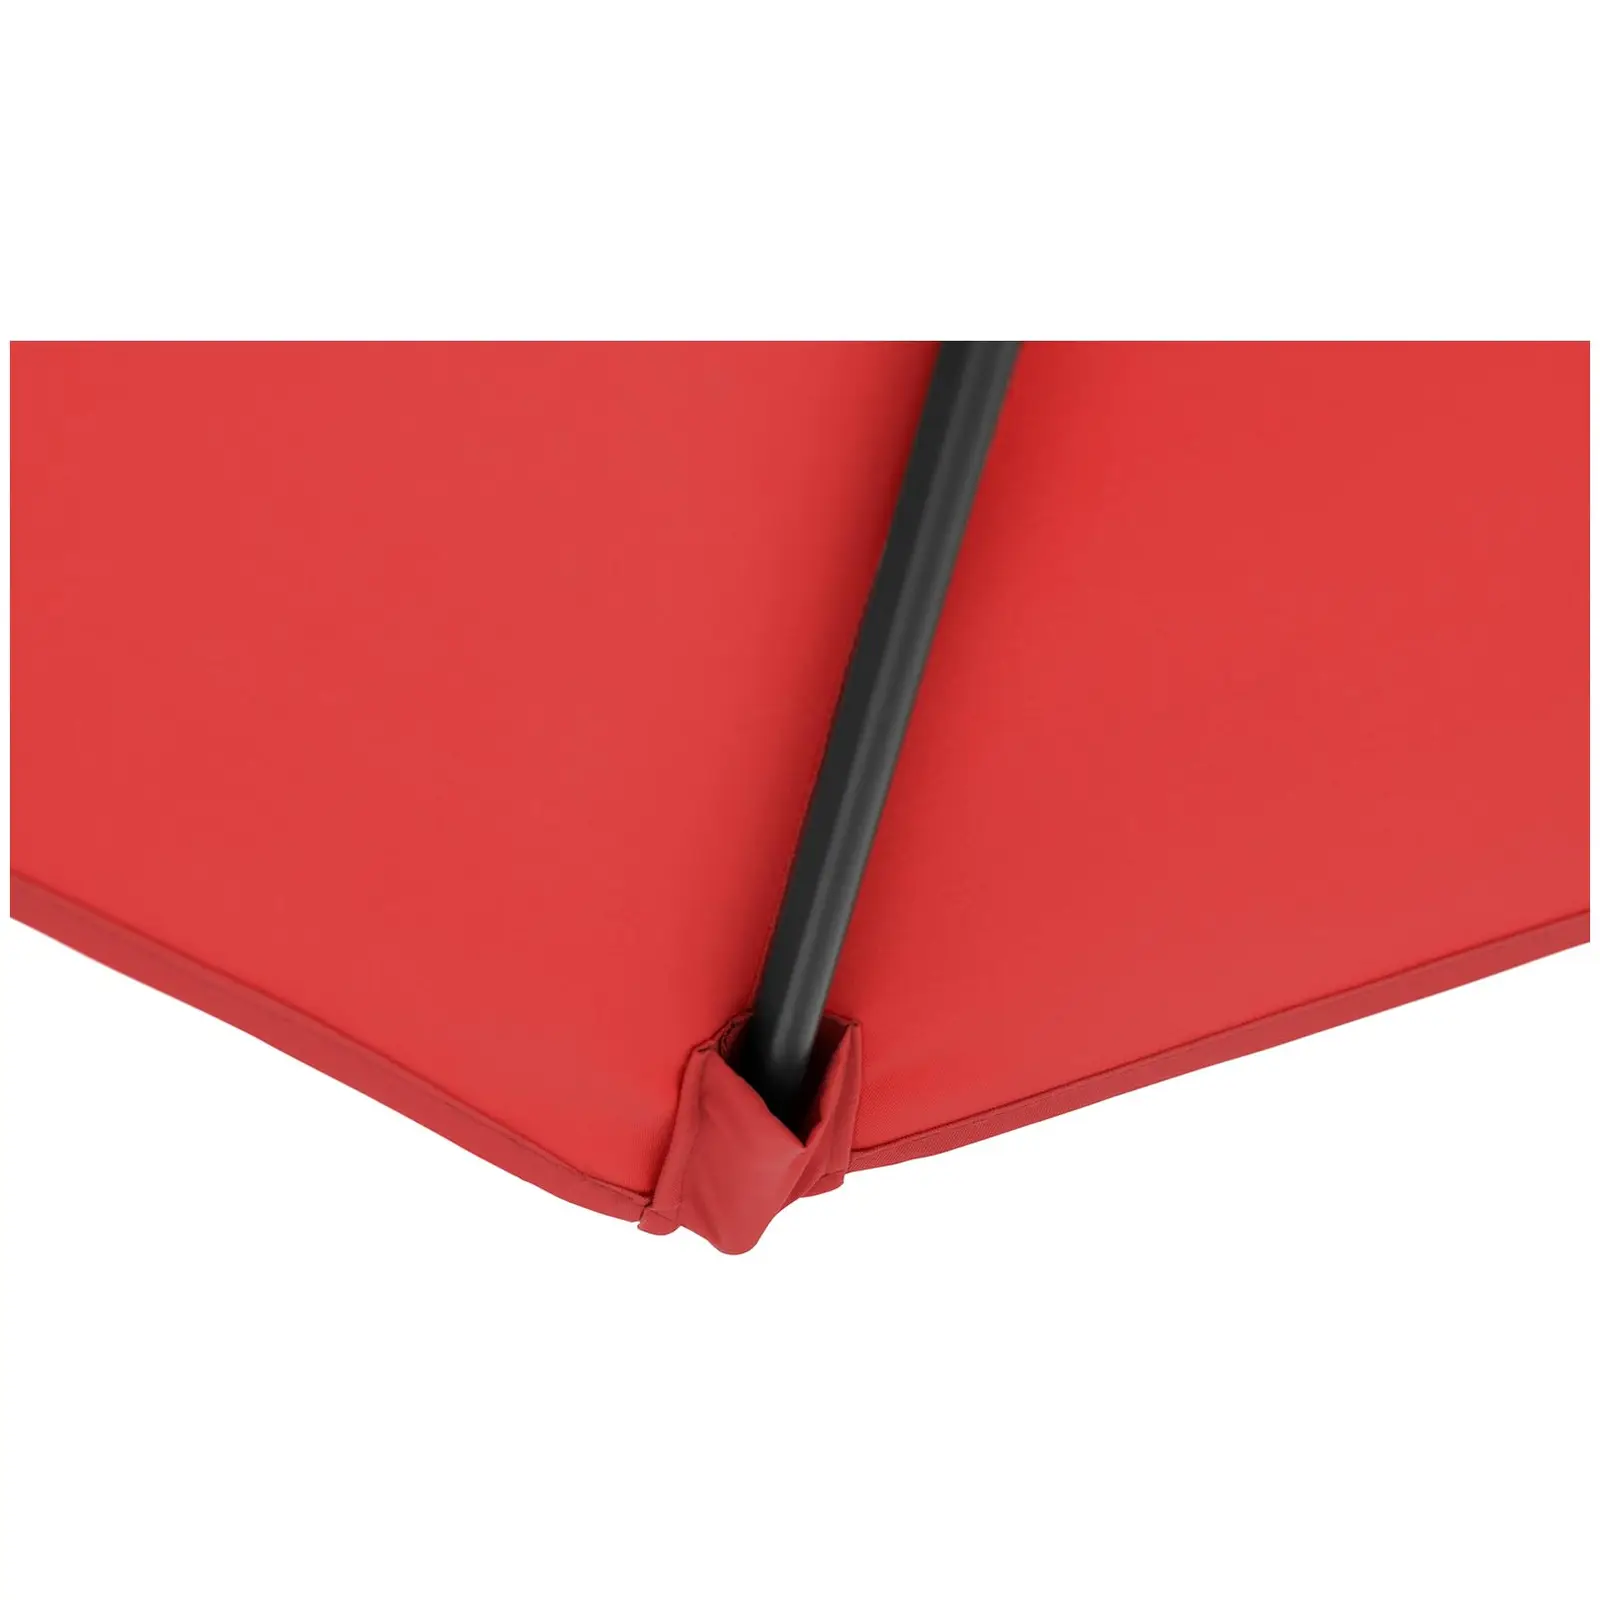 Factory second Hanging Parasol - red - square - 250 x 250 cm - rotatable